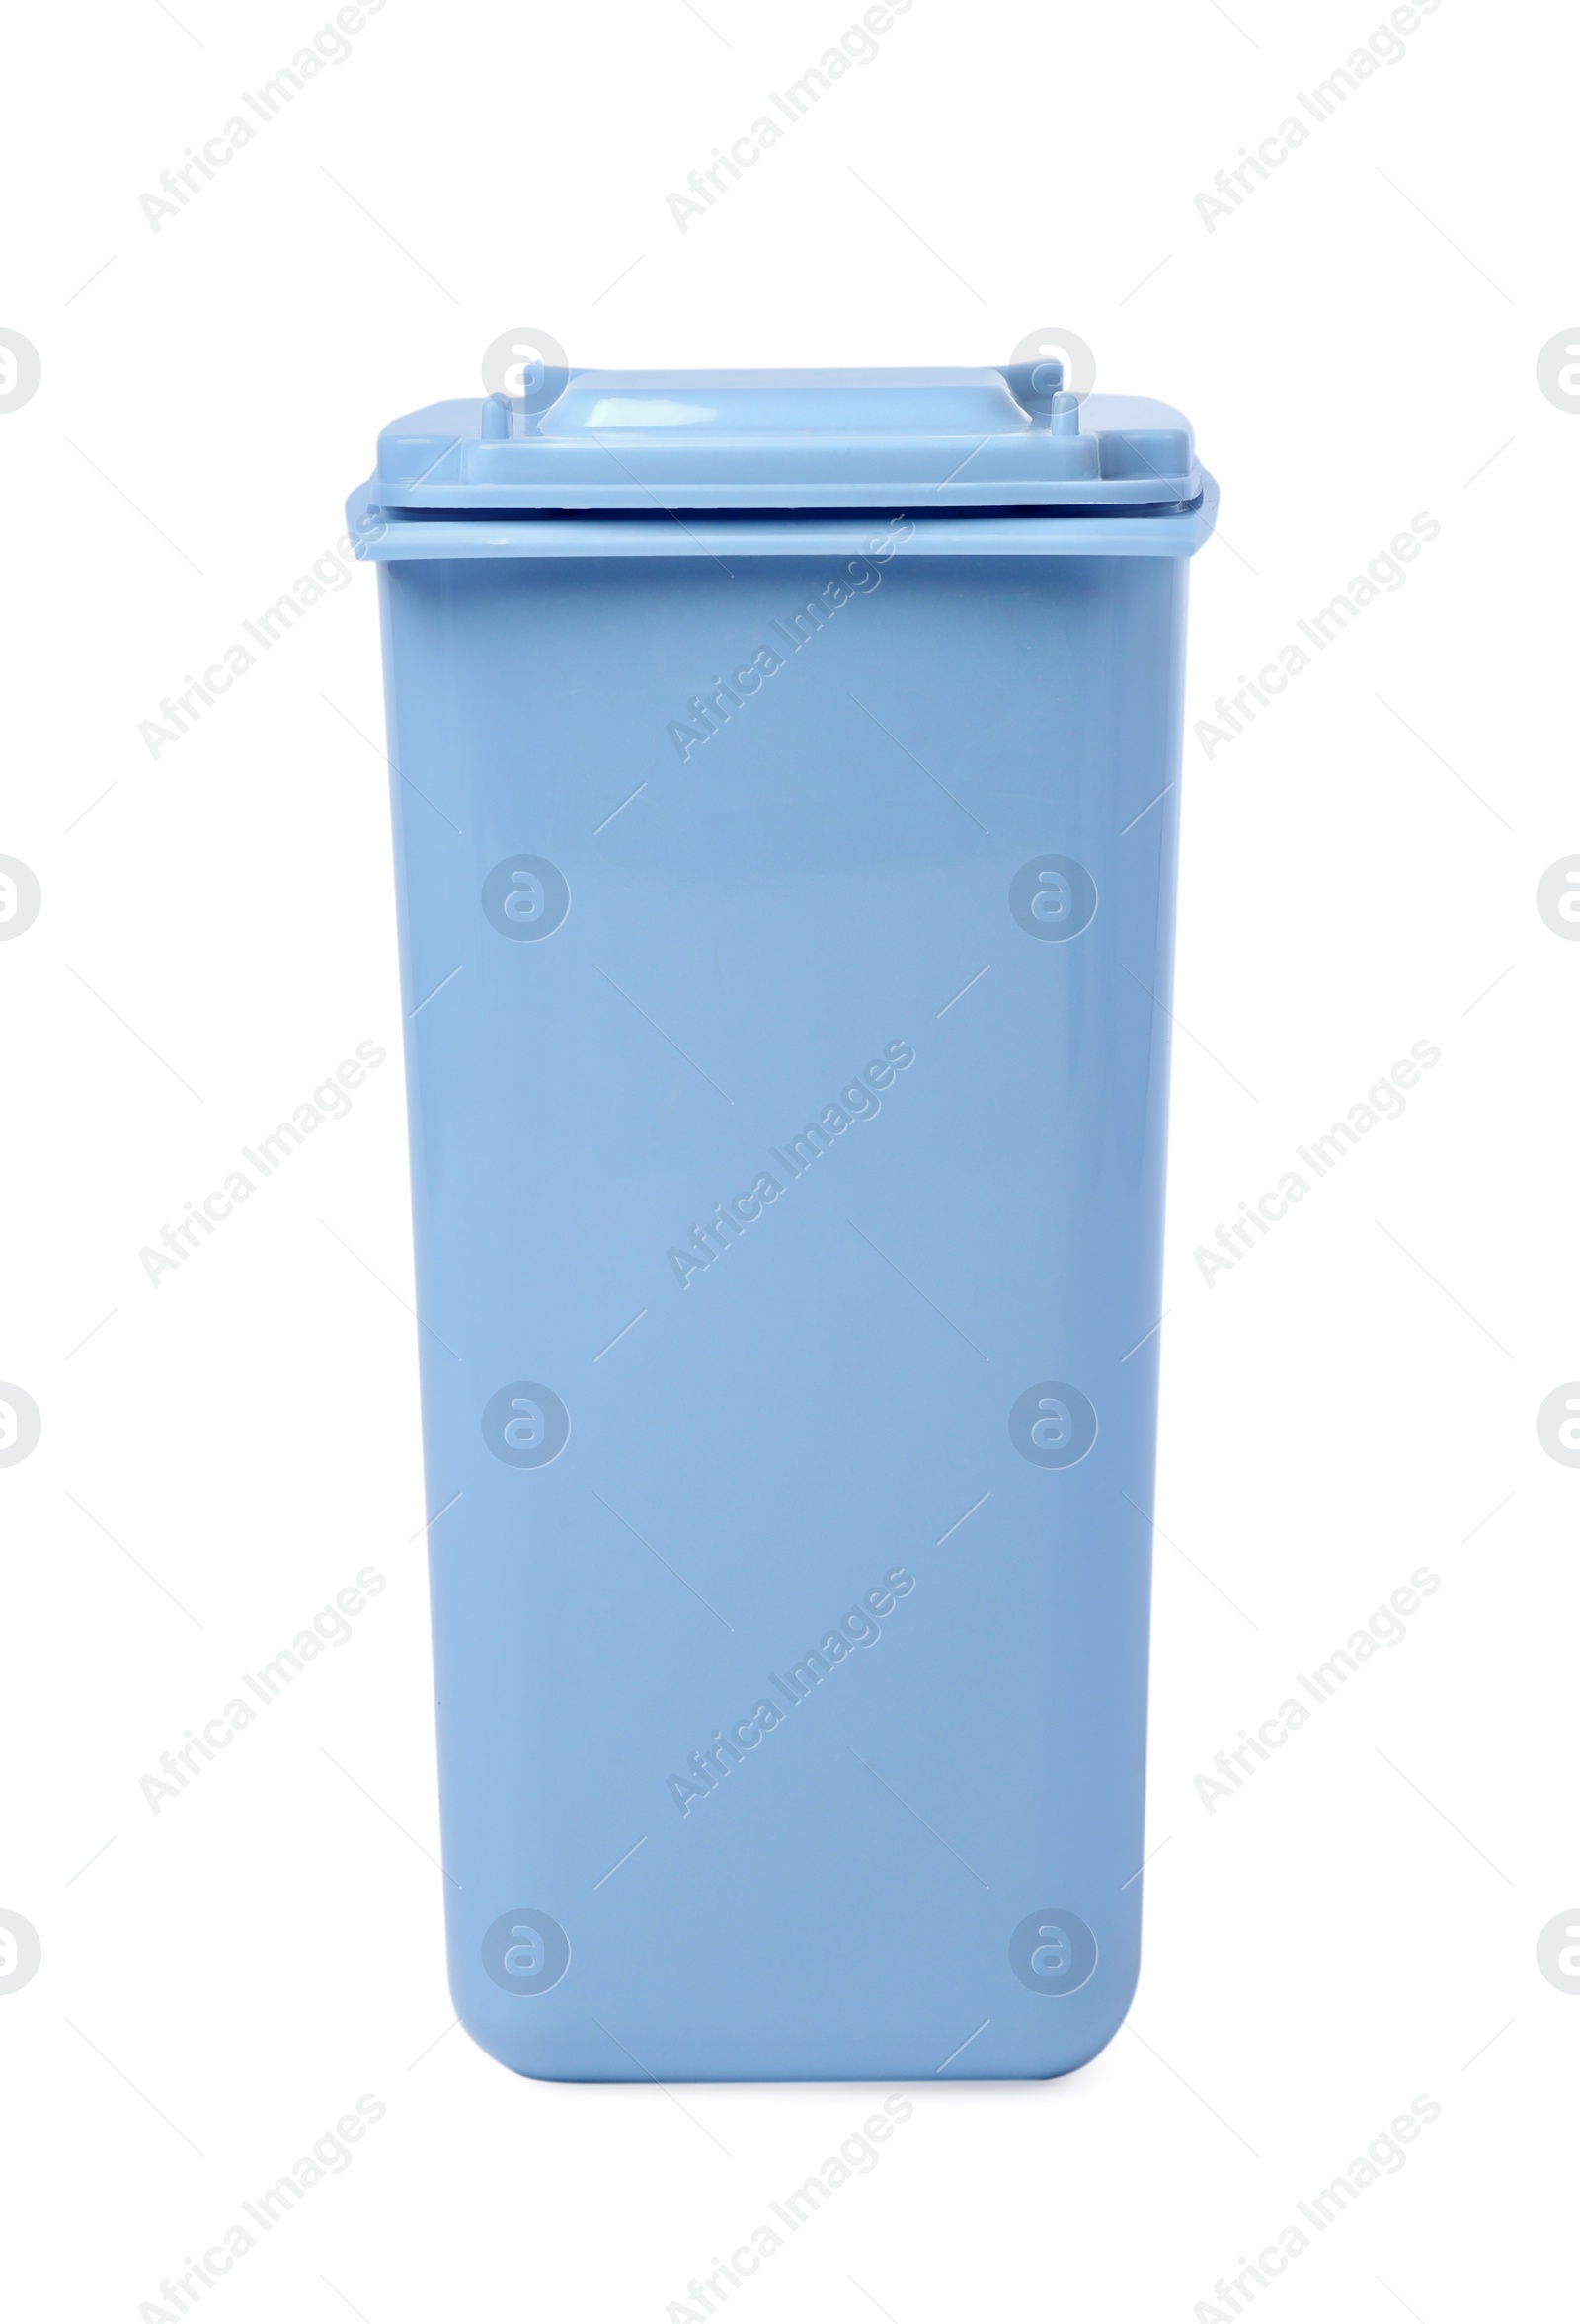 Photo of Recycling bin for batteries isolated on white